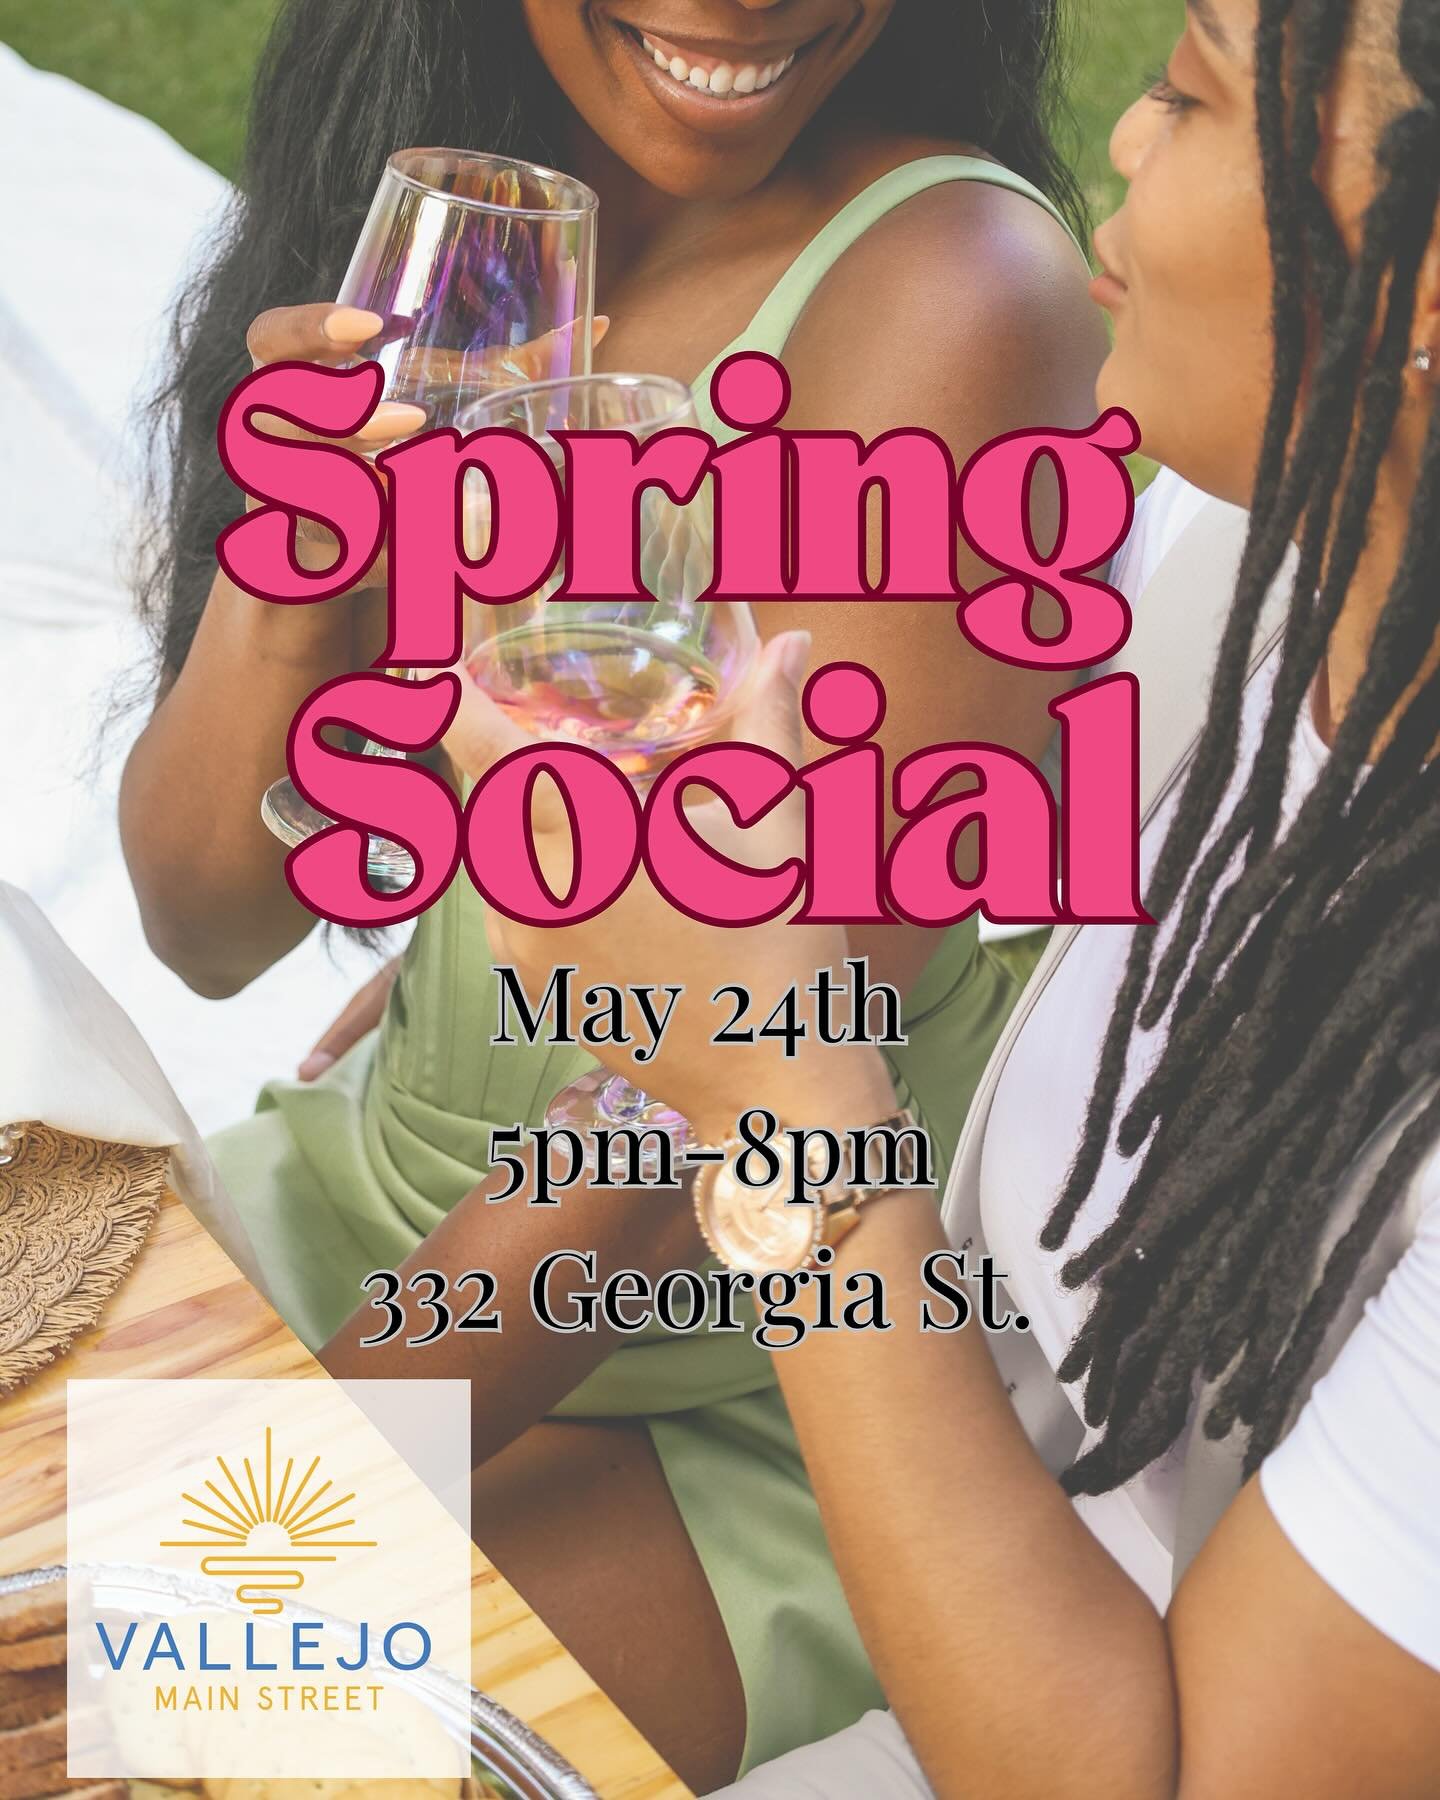 We&rsquo;re throwing a little get together and YOU&rsquo;RE invited! Come hang out with us downtown on the evening of May 24th. We&rsquo;ll be sipping on local wines and beers, supporting local businesses and socializing with our neighbors! Join us i